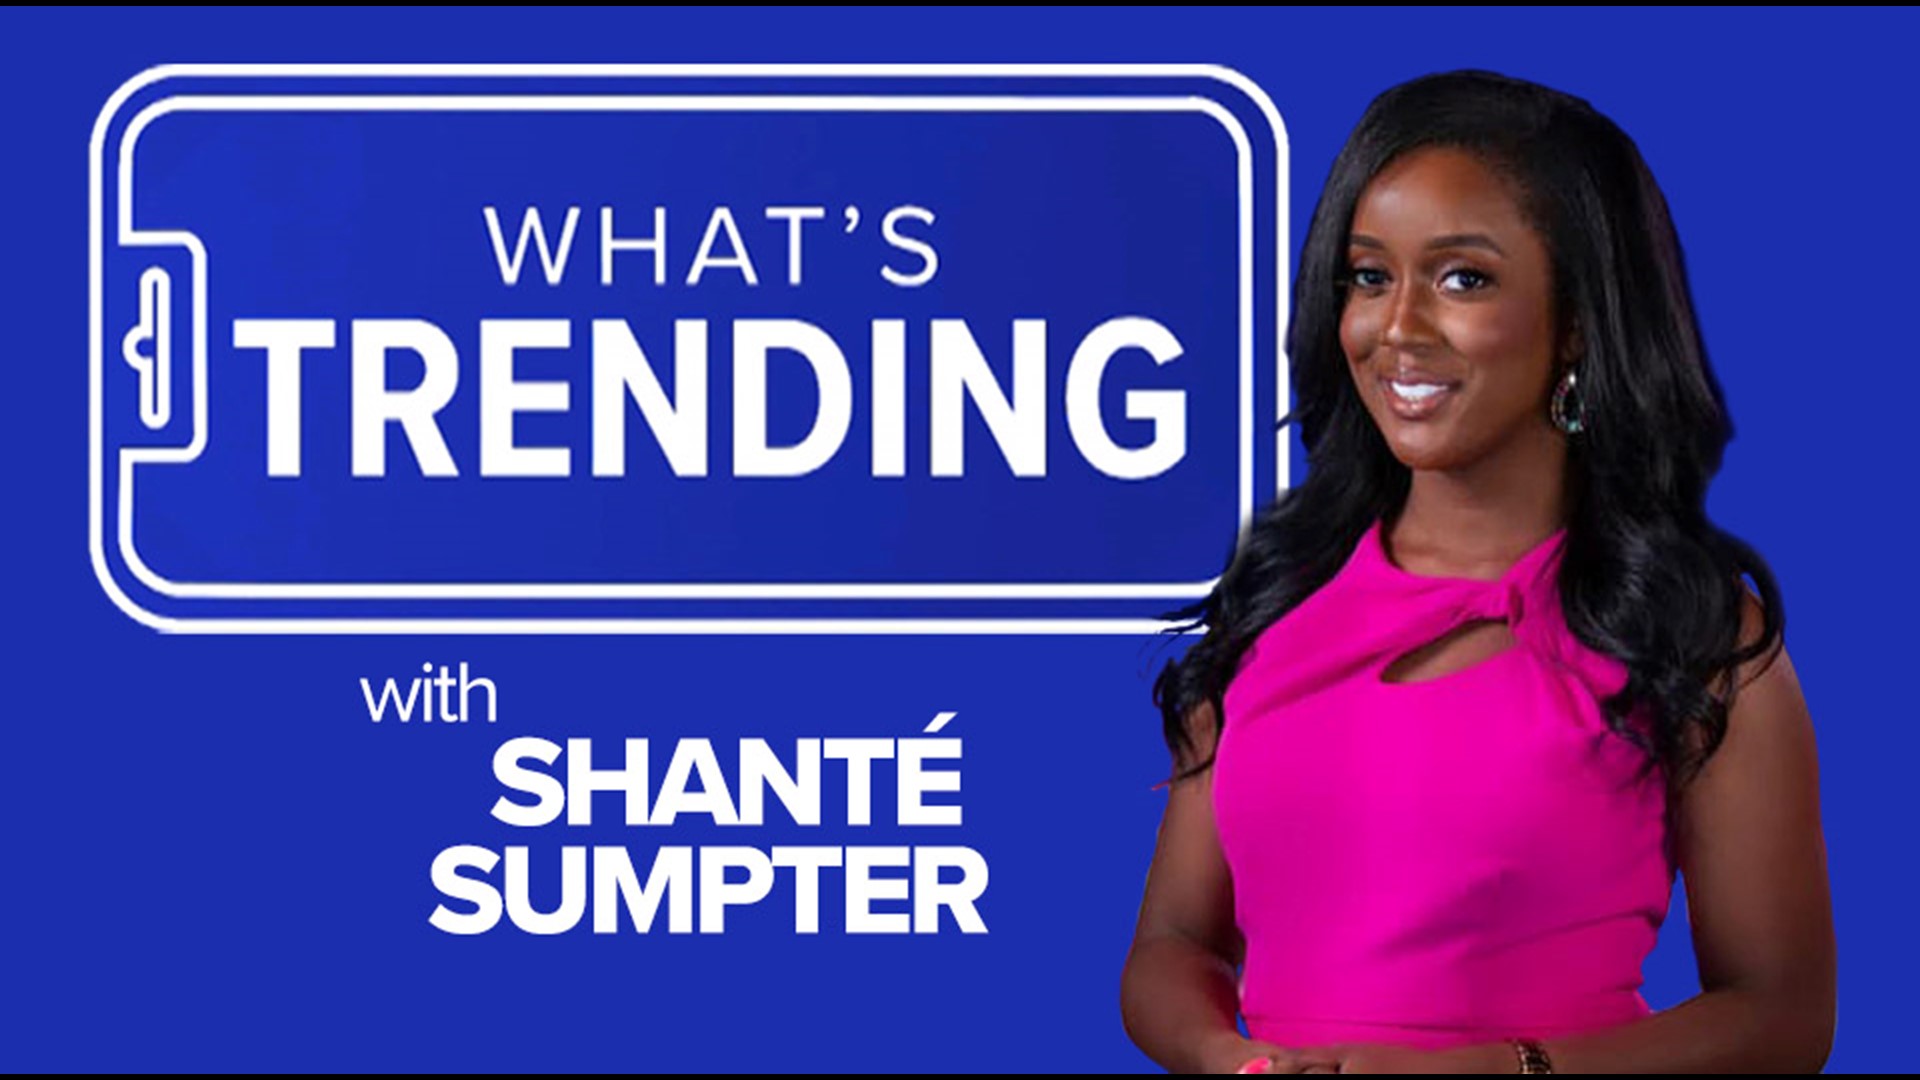 Billionaires battle, the Halloween queen returns and Americans reveal their top fears. Shante Sumpter what's trending for October 12th.